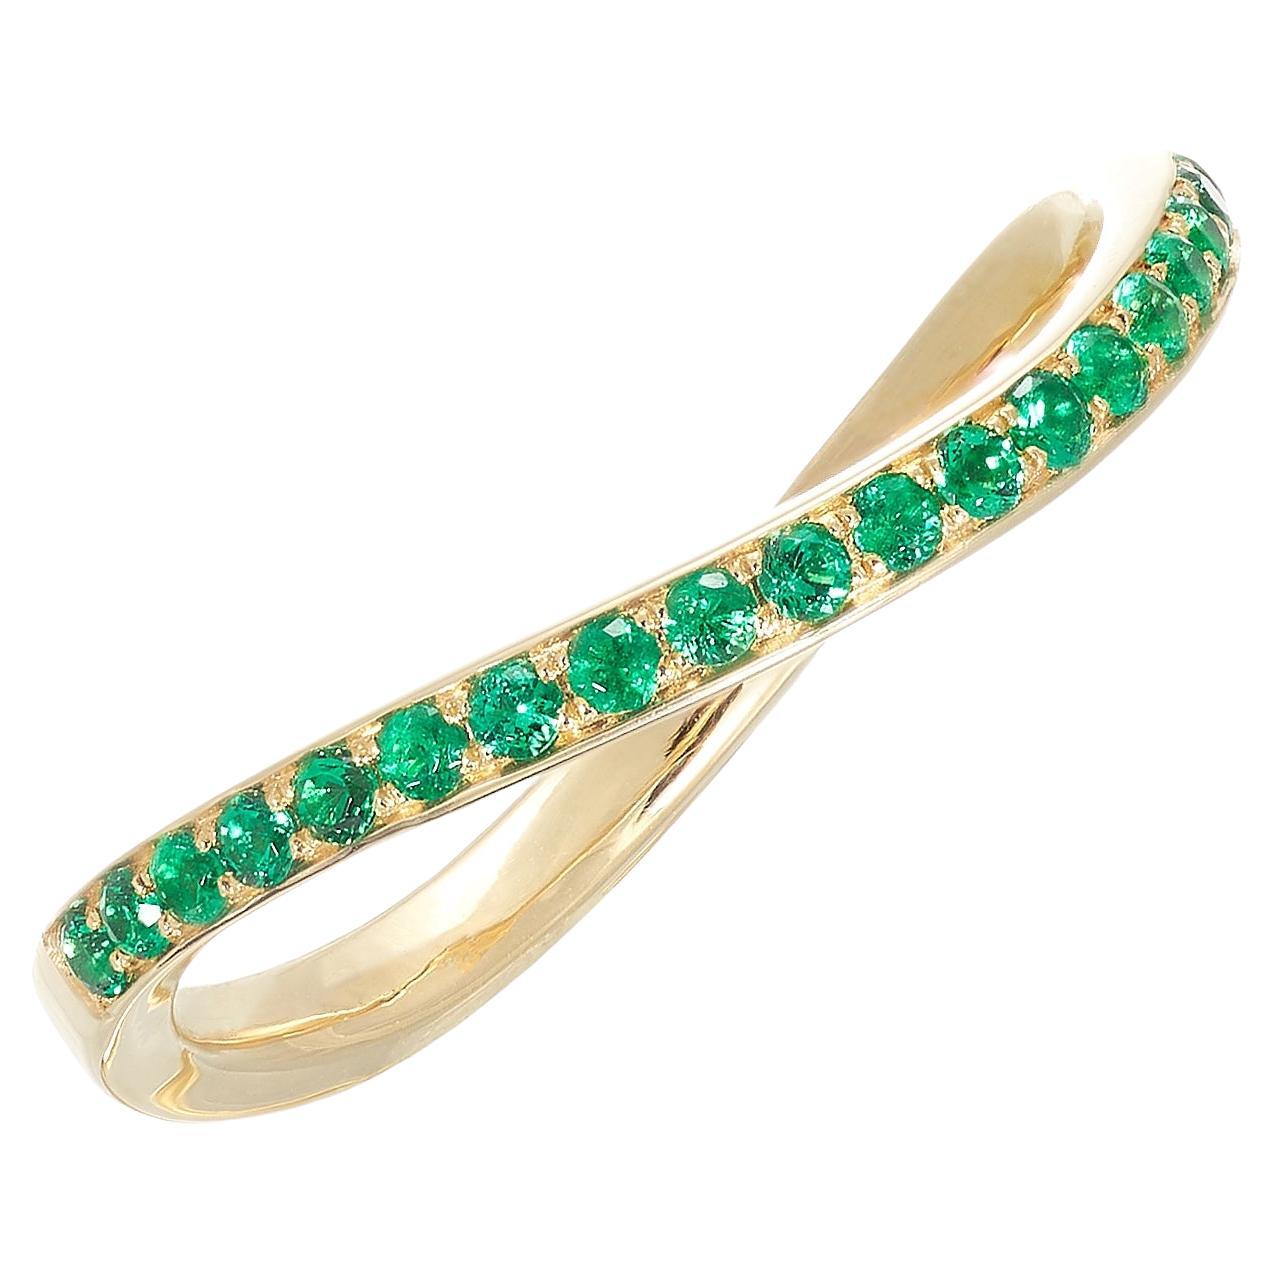 For Sale:  Rosior Emerald "Half Eternity" Shaped Band Ring Set in Yellow Gold